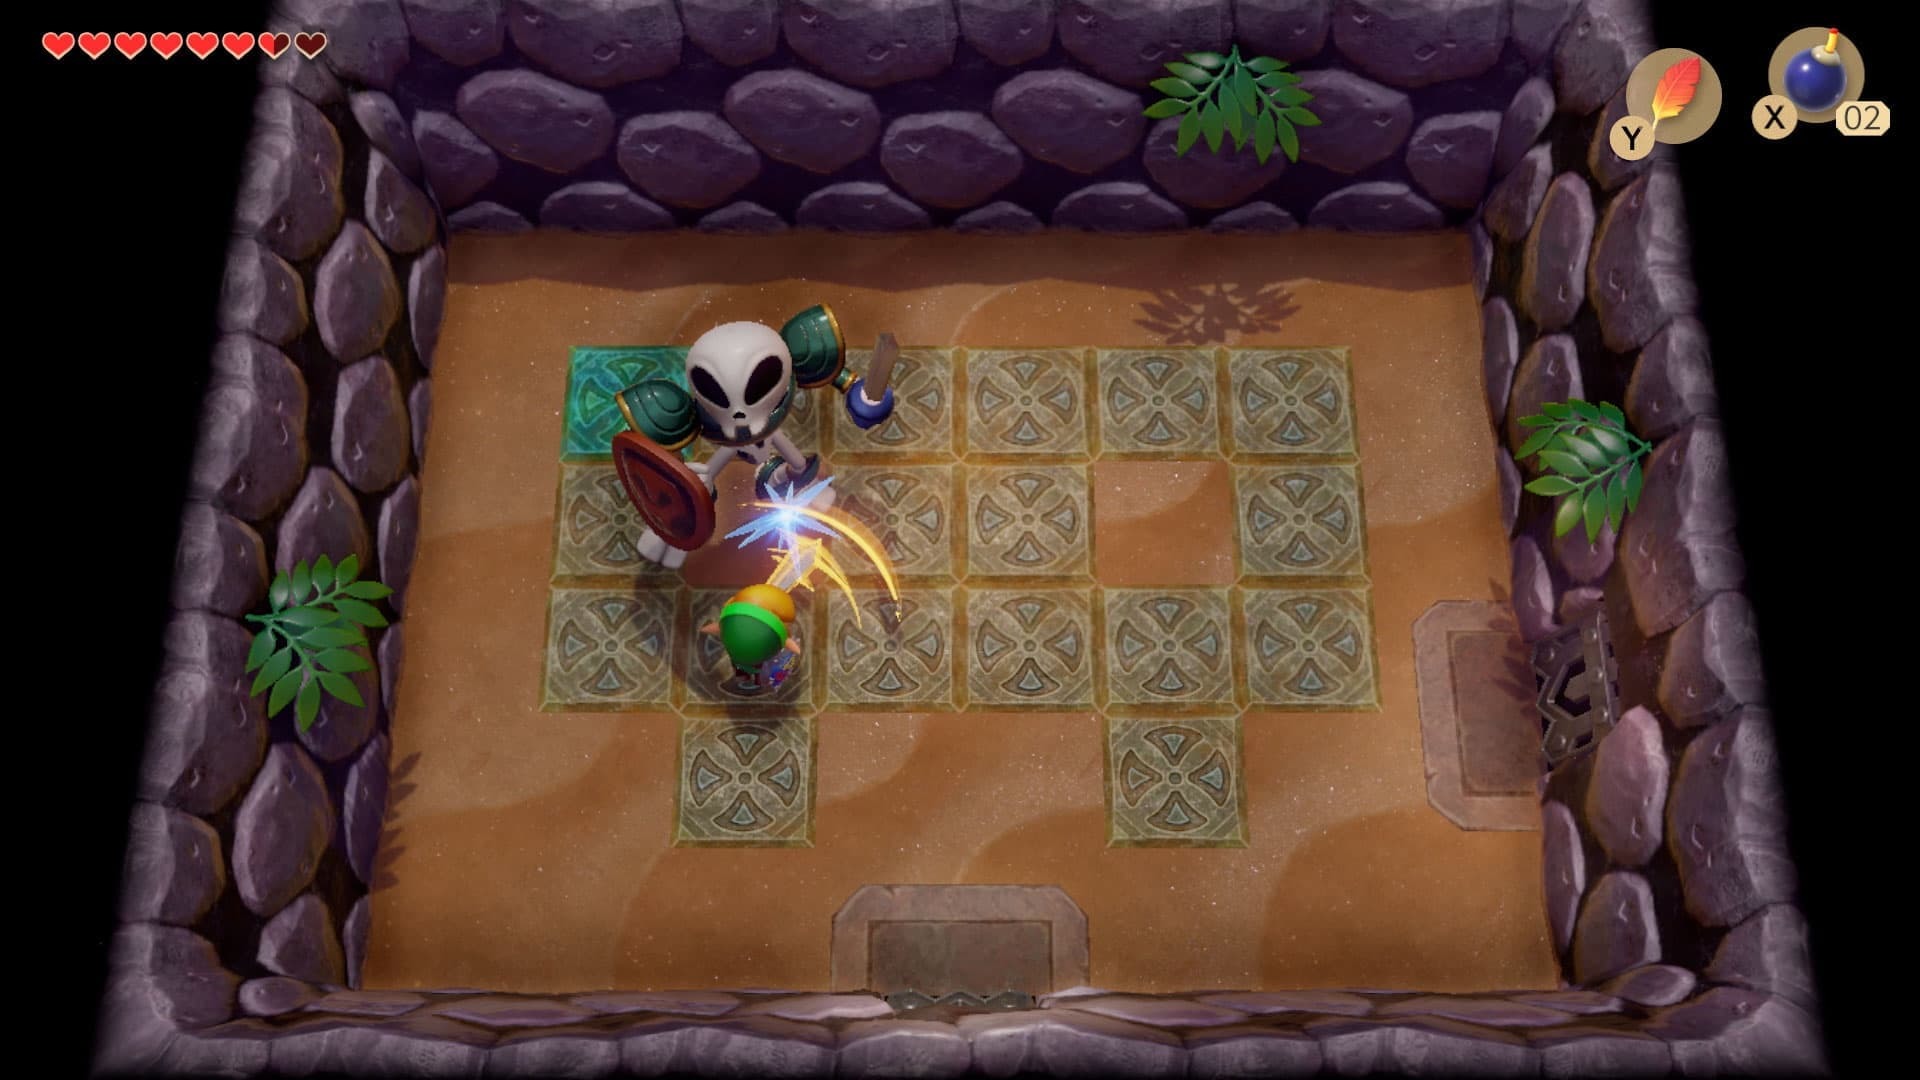 The Legend of Zelda Link's Awakening now FULLY PLAYABLE on PC